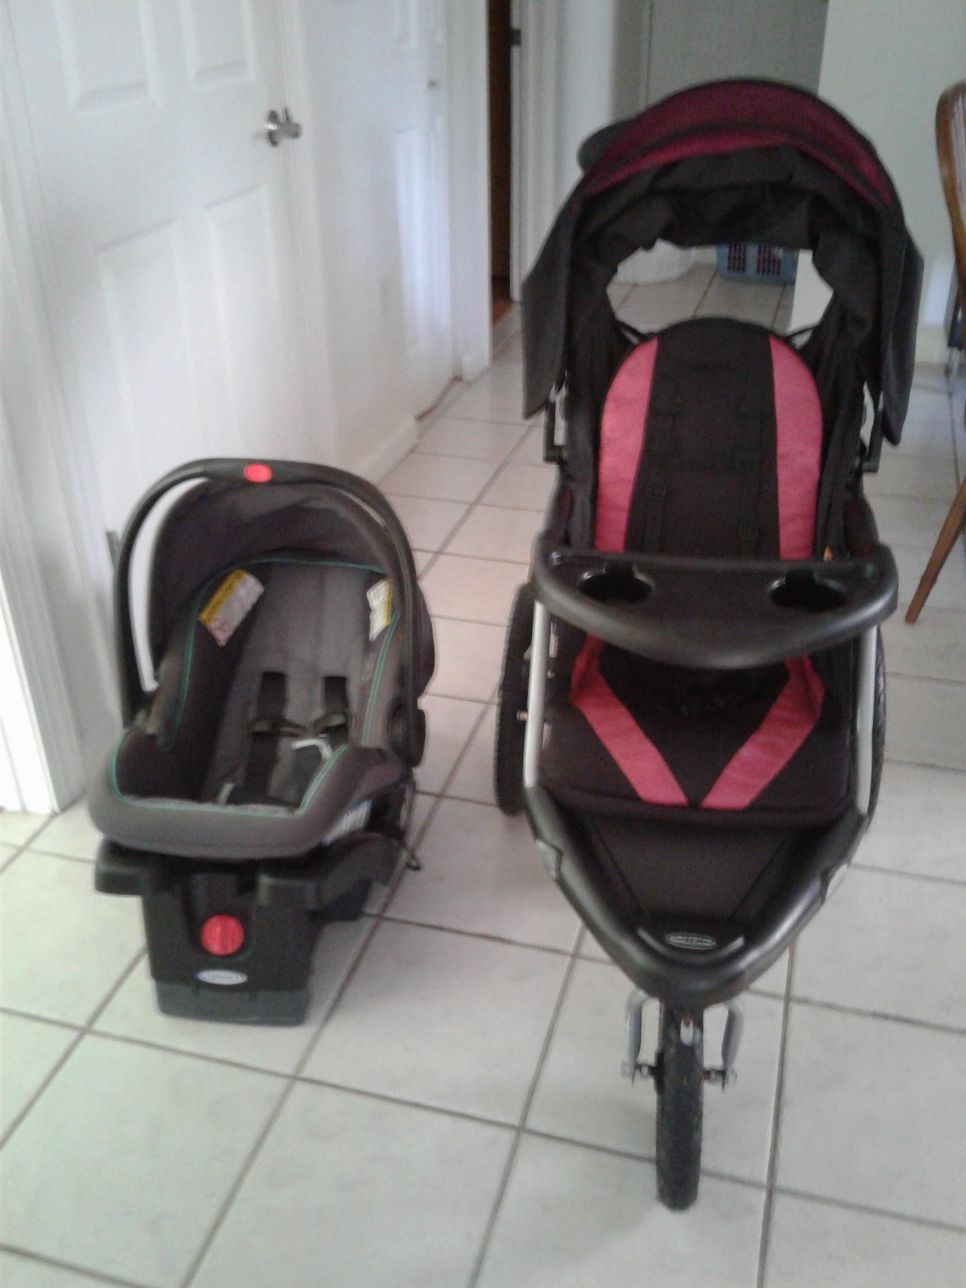 Graco baby car seat and running stroller with bluetooth for radio.